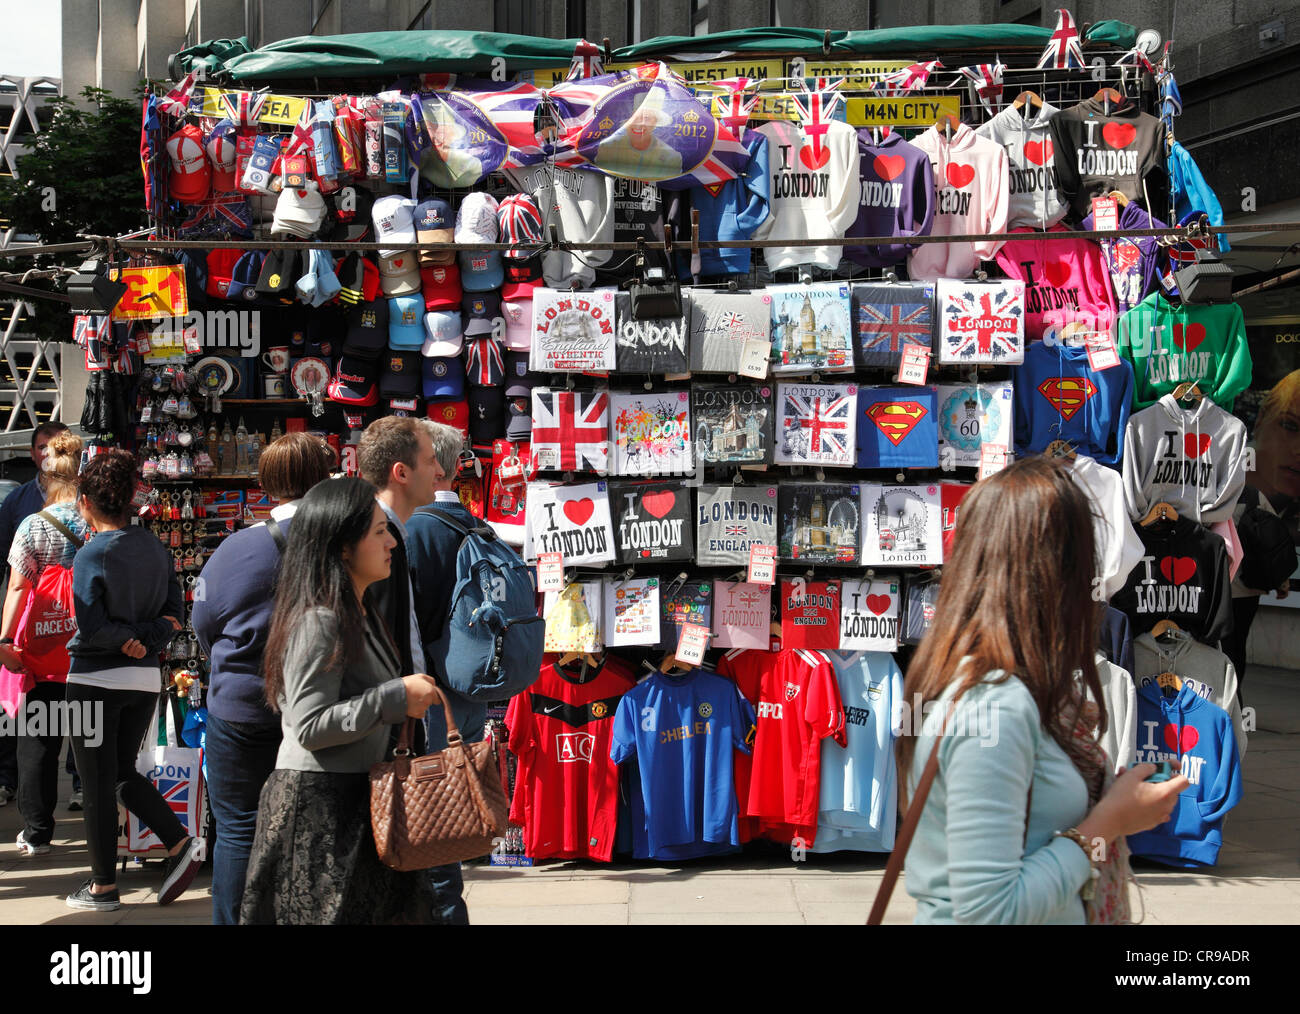 Ein Stall mit Souvenirs in Westminster, London, England, UK Stockfoto